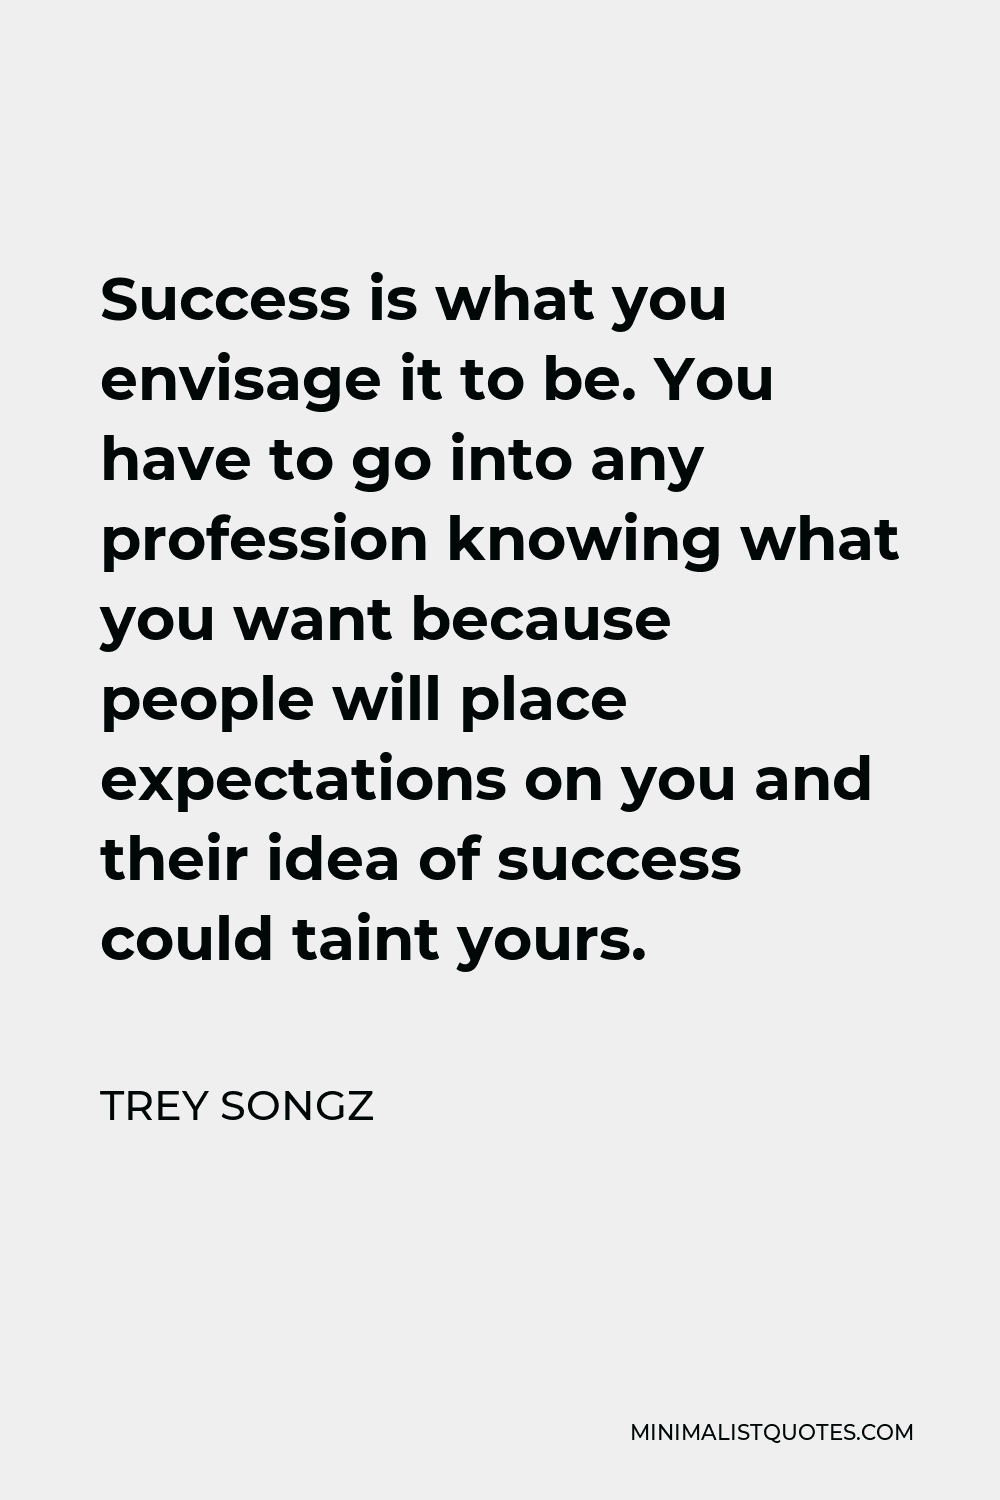 Trey Songz Quote - Success is what you envisage it to be. You have to go into any profession knowing what you want because people will place expectations on you and their idea of success could taint yours.